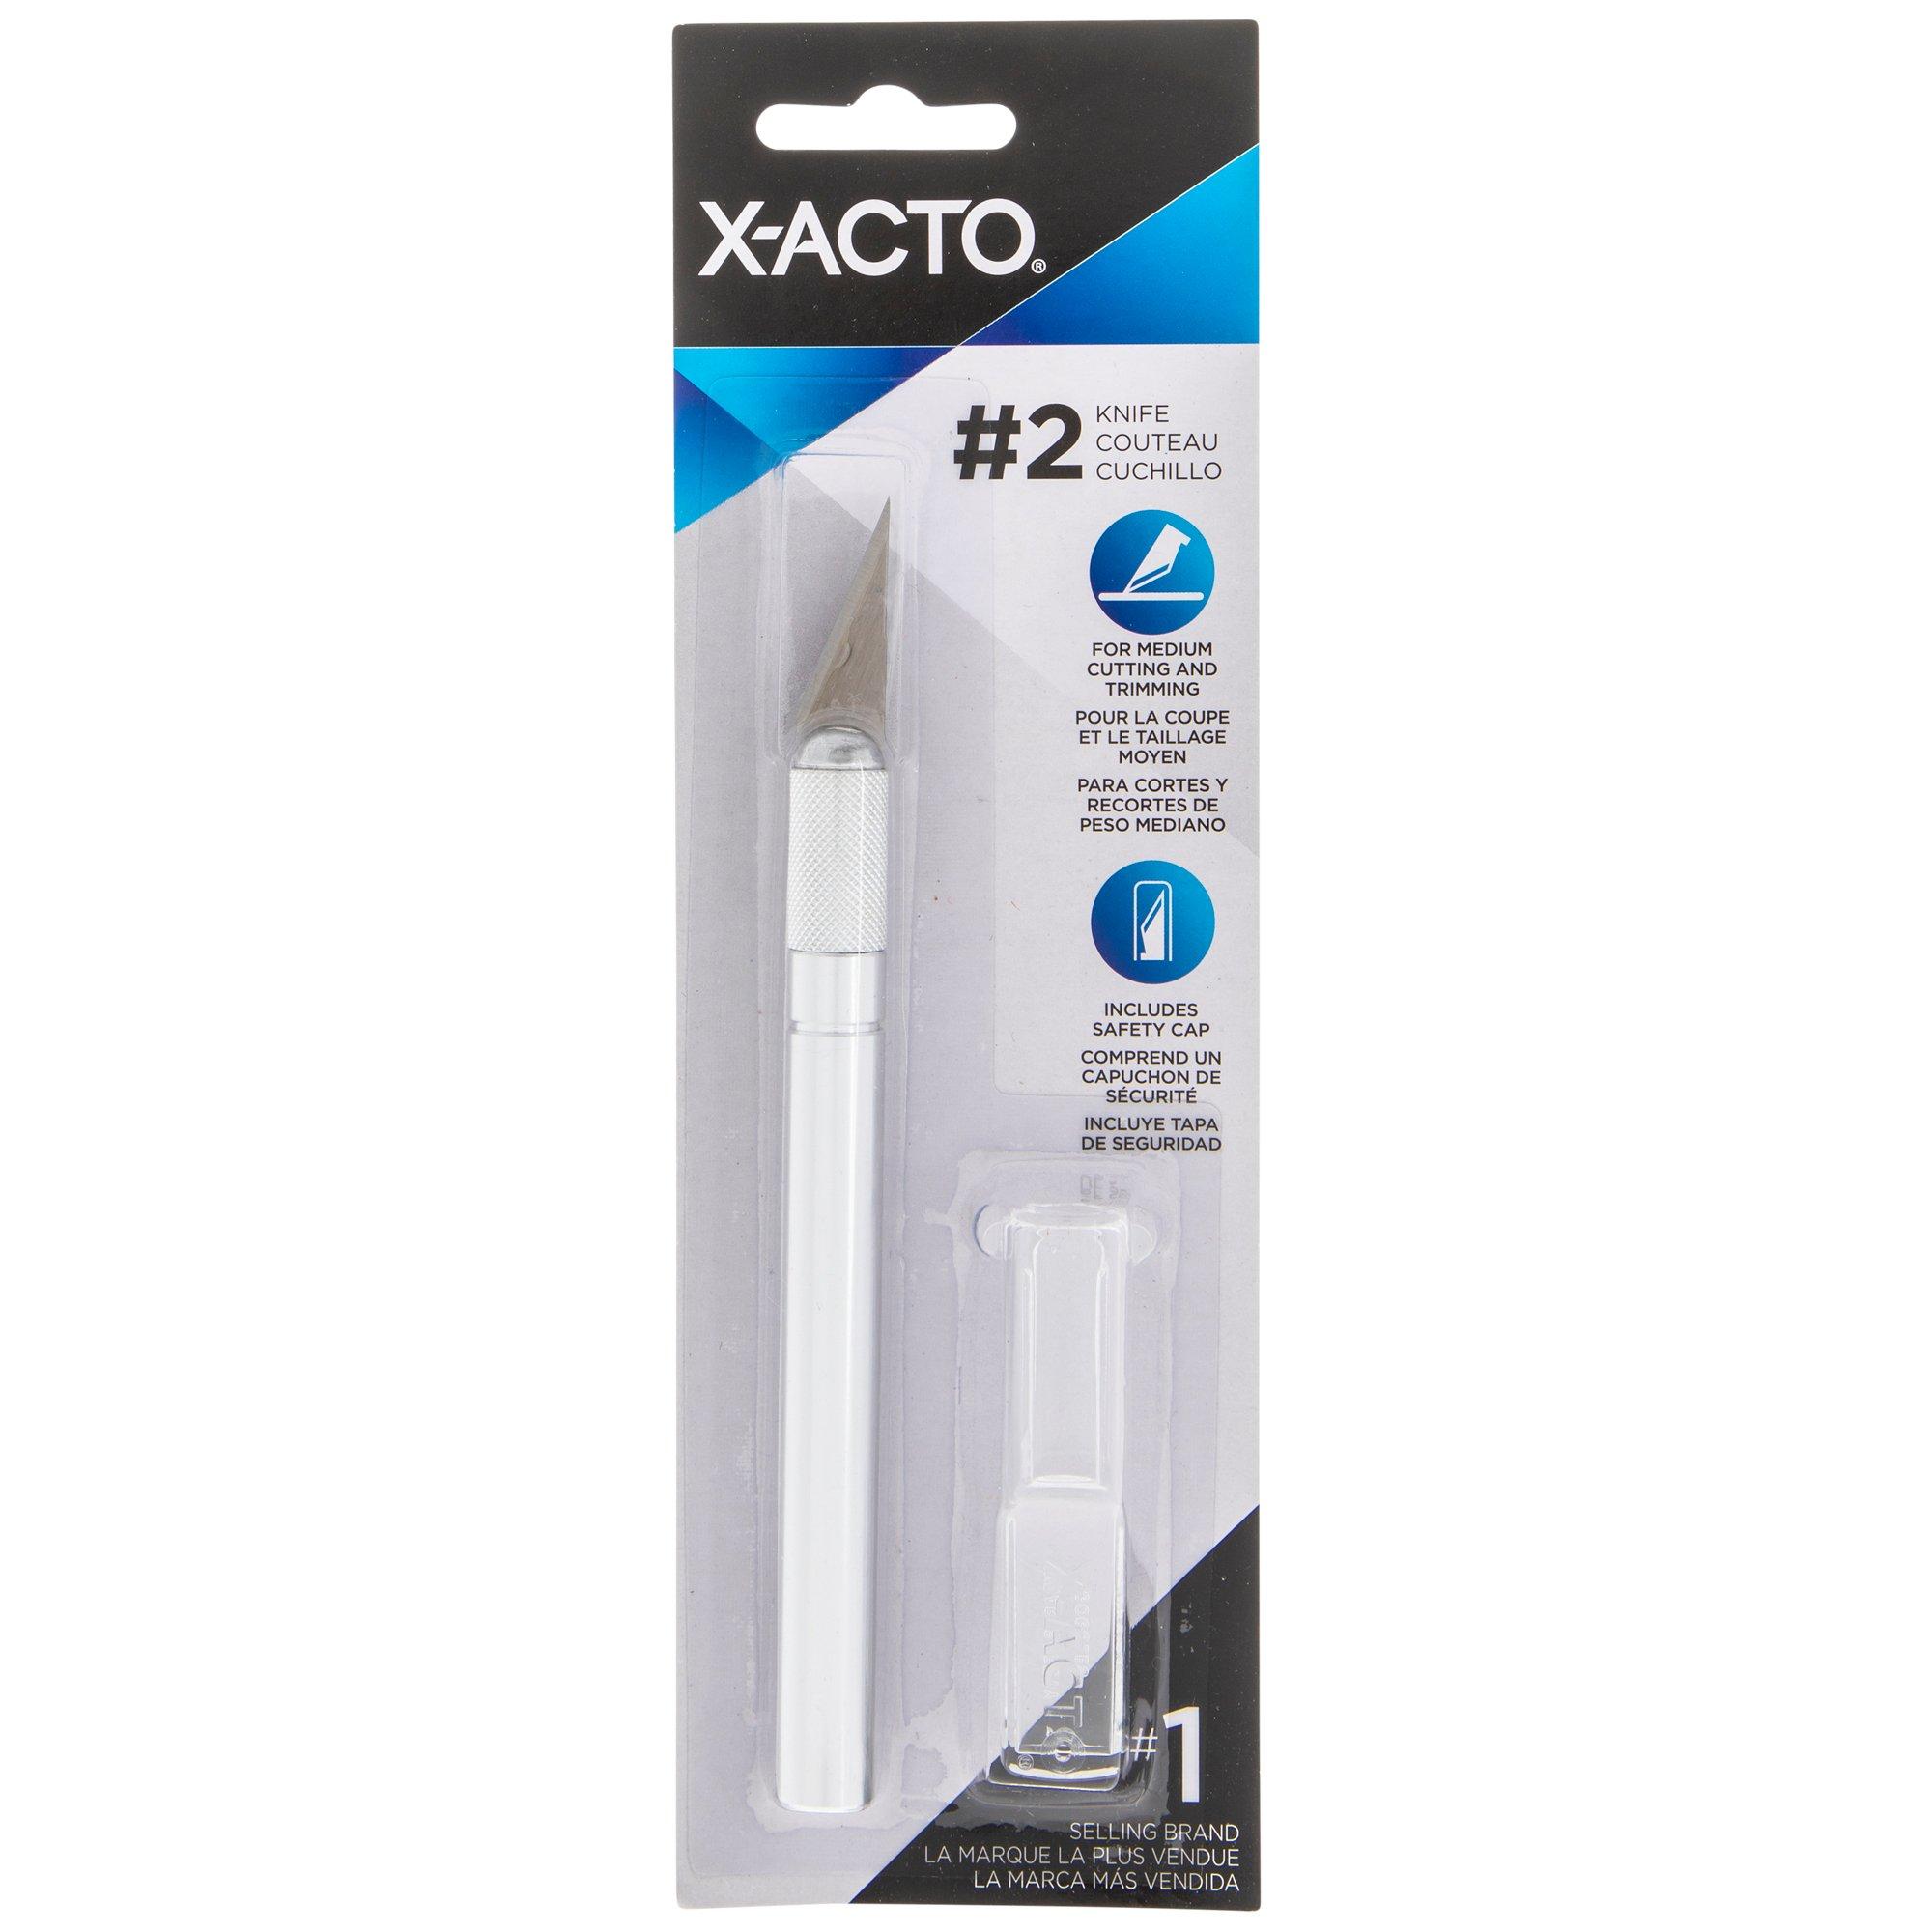 X-Acto #2 Medium Duty Knife - The Compleat Sculptor - The Compleat Sculptor